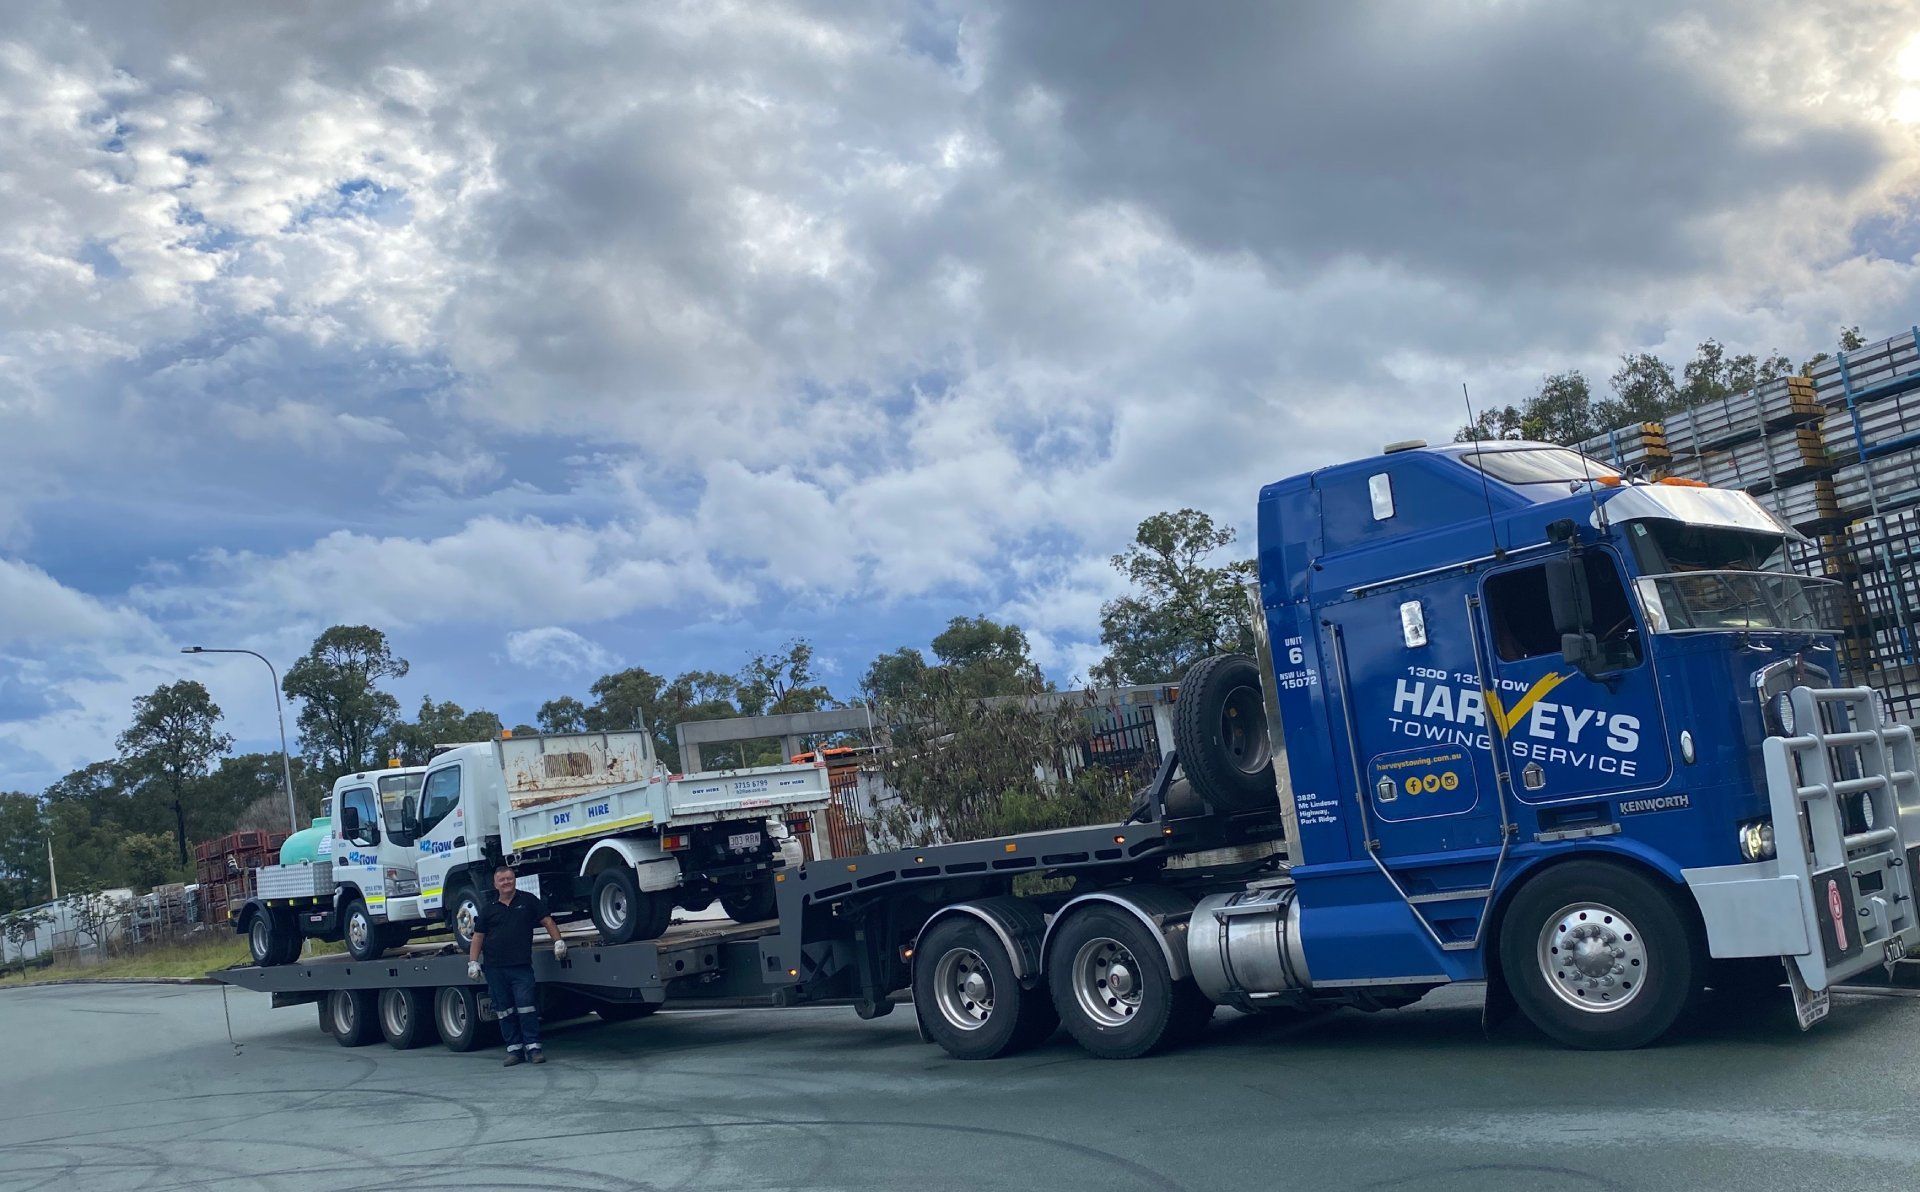 Harvey's Towing our Mini Trucks to North Queensland